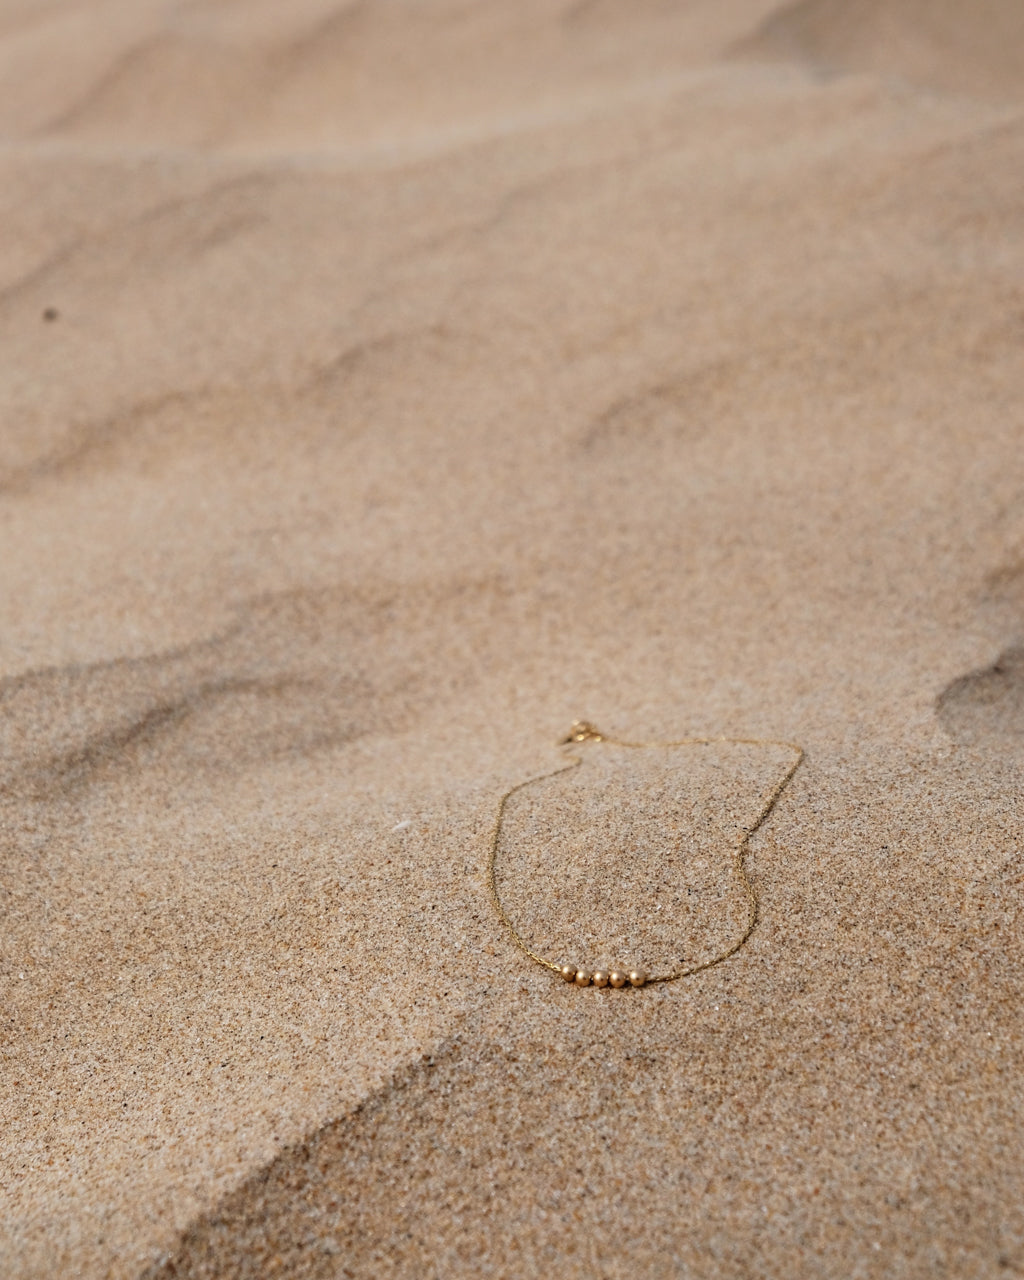 14K Gold Filled Bead Necklace | Inspiration Her Jewellery